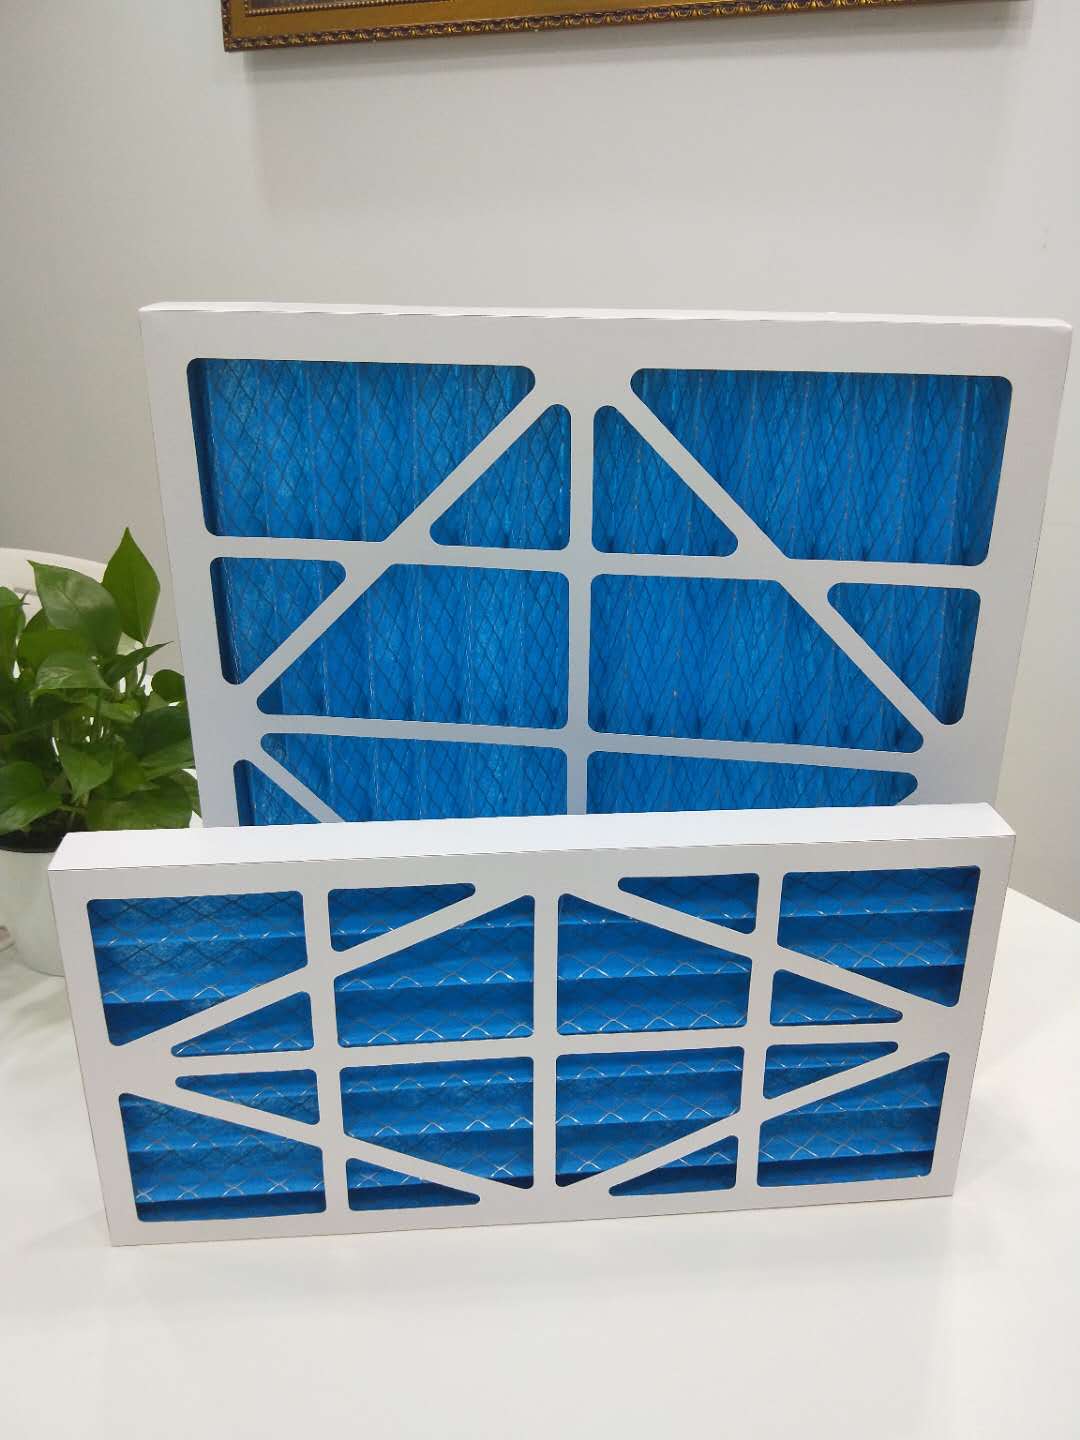 Cardboard Panel Air Filter for Air Coditioning Unit